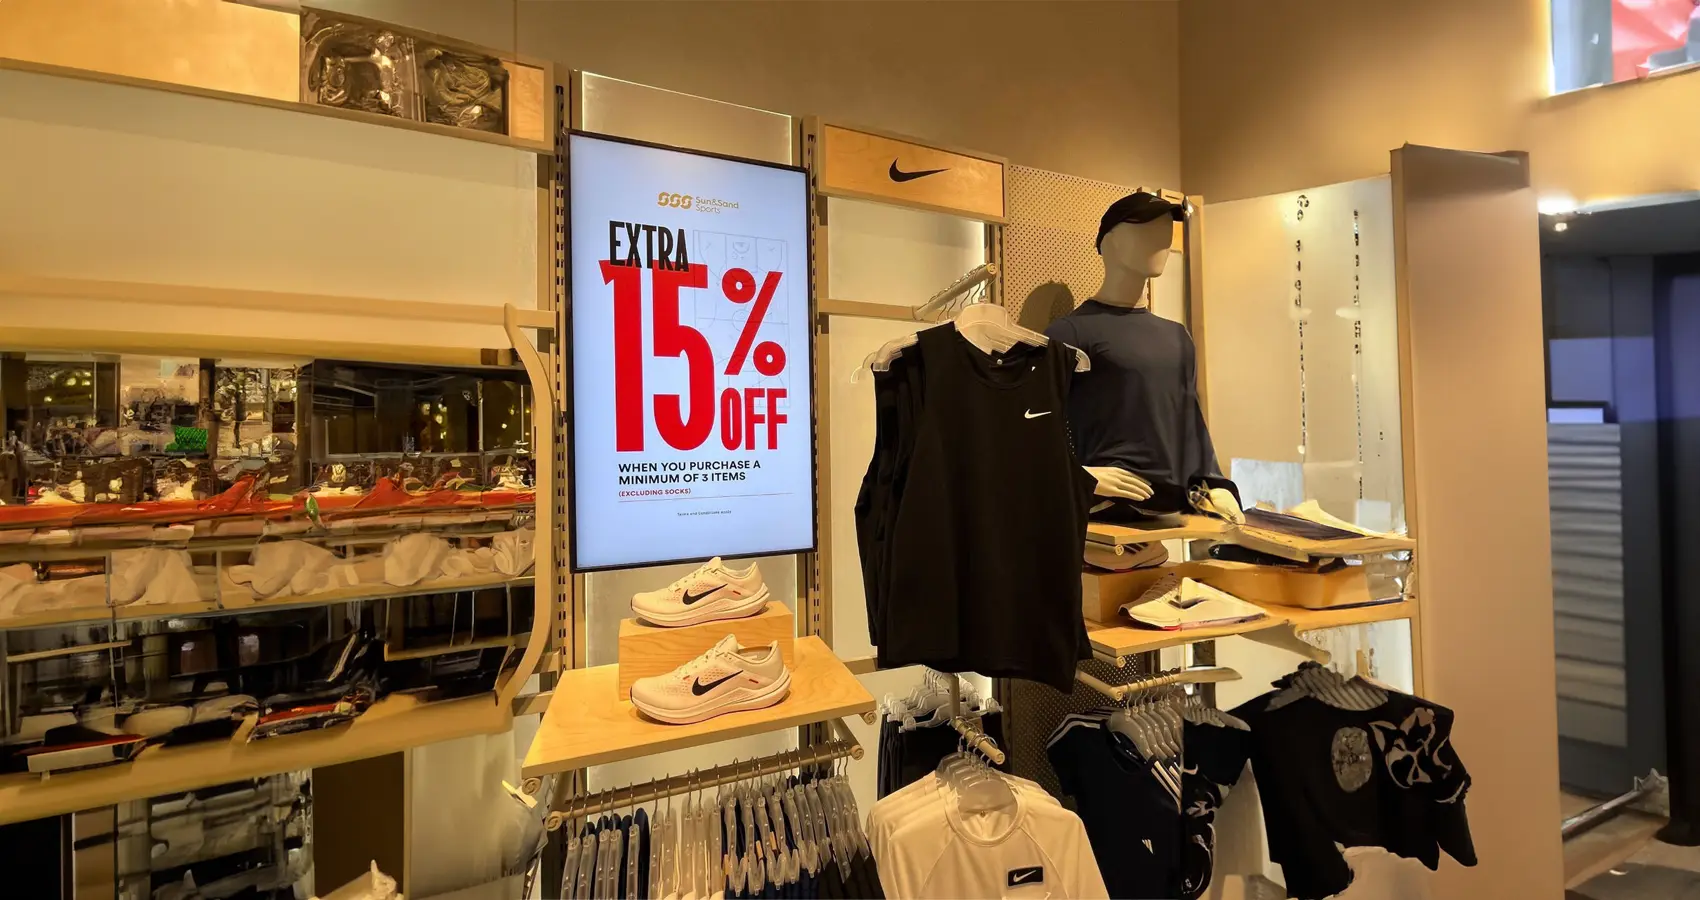 Digital Signage Display showing a 15% off at Sun&Sand Sports